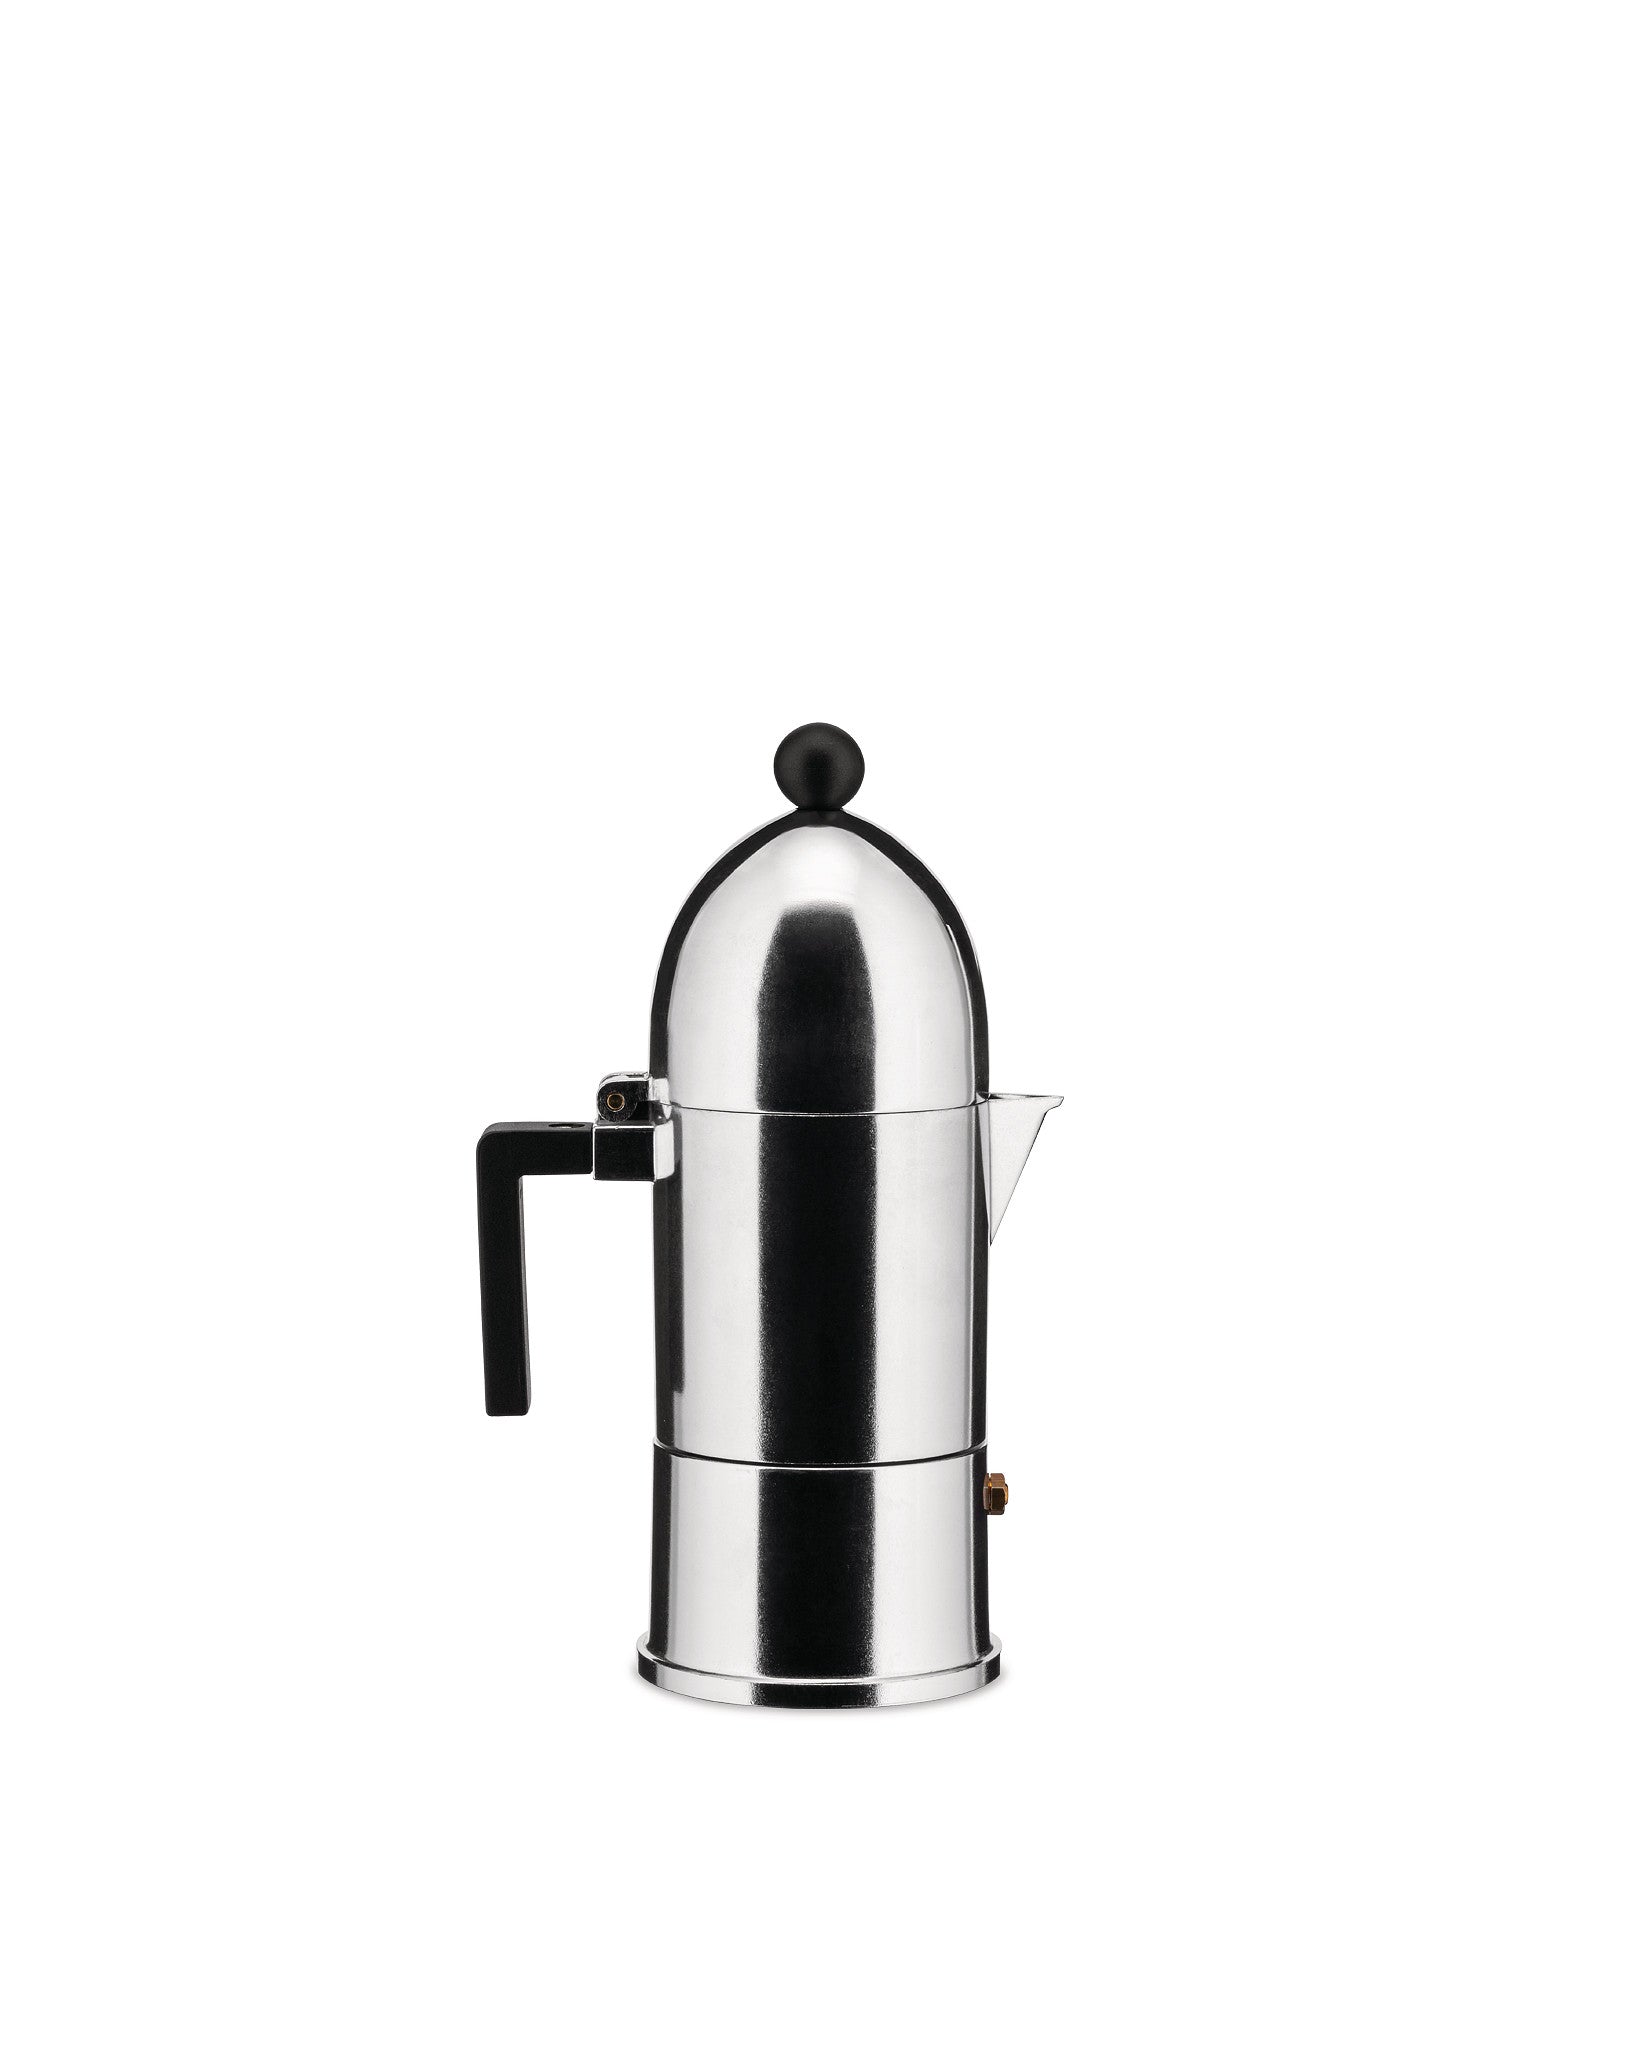 La cupola ESPRESSO COFFEE MAKER designed by Aldo Rossi for Alessi. This caffettiera is an Italian design classic, based on the original moka pot stovetop espresso maker. Contemporary & distinctive with its dome top and bullet-shaped body of polished aluminium